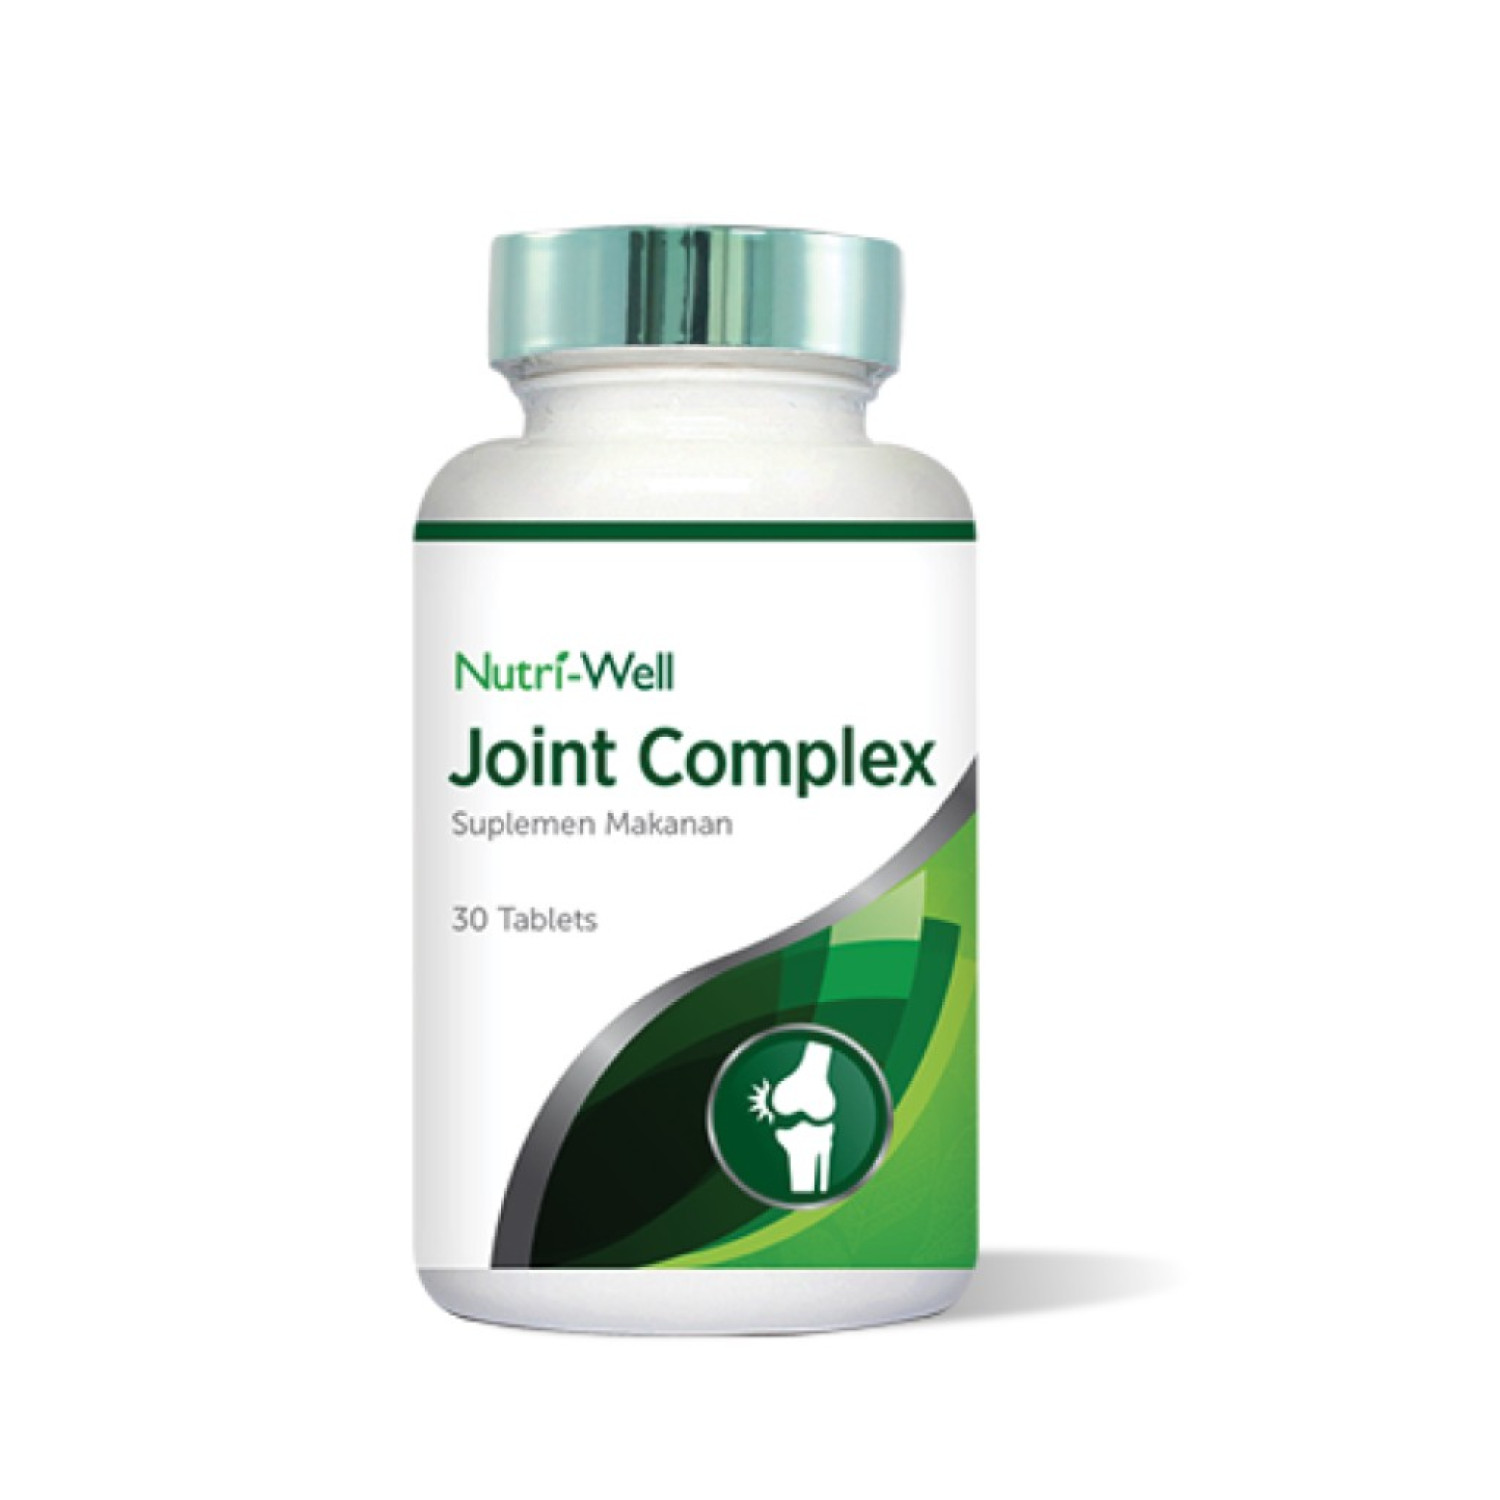 nutriwell-joint-complex-30-tablets-65431dfb3054e.jpeg